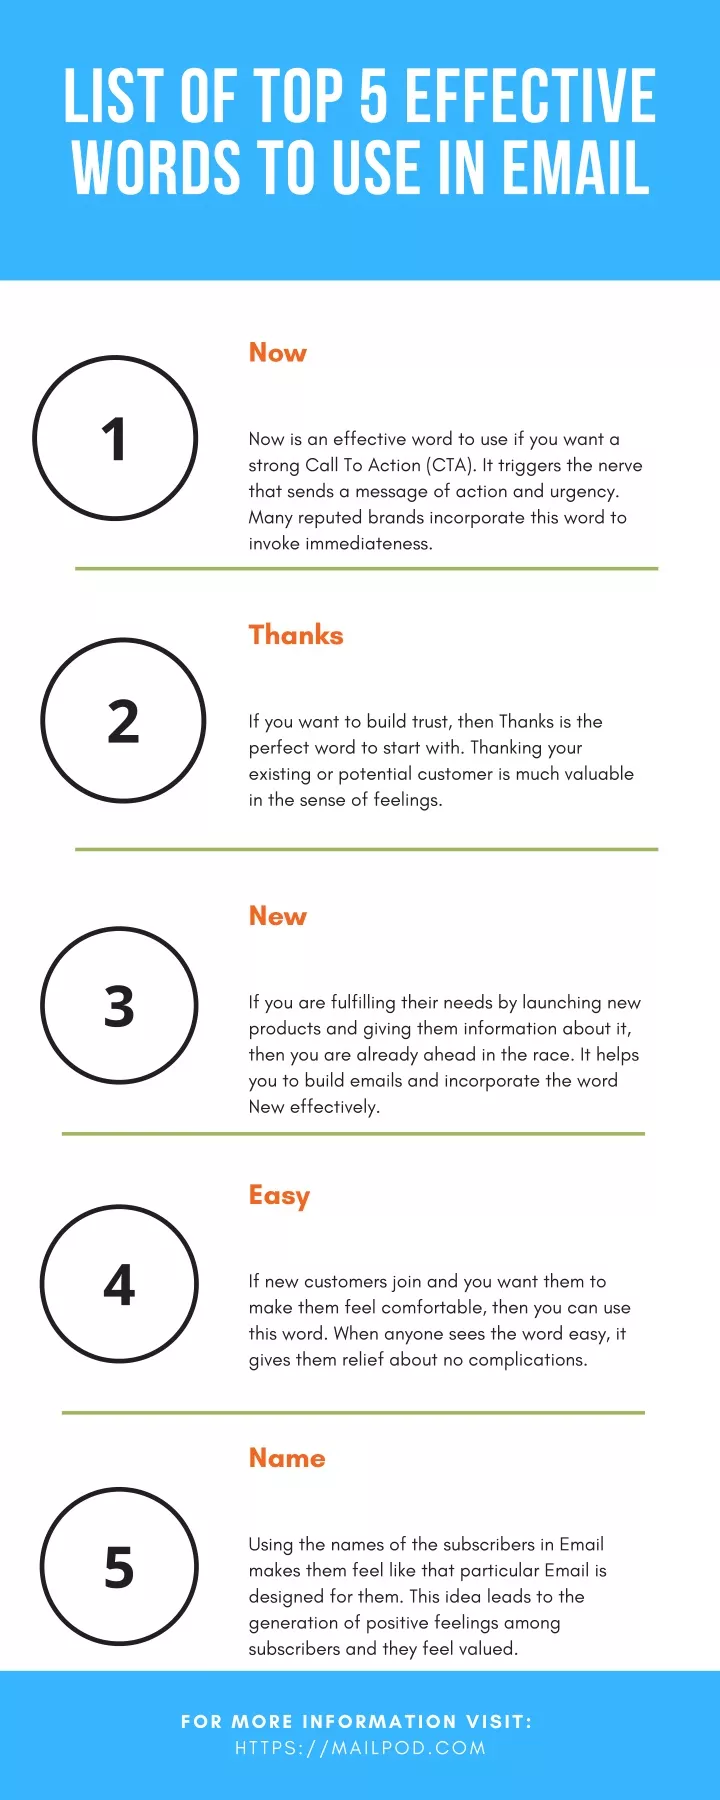 list of top 5 effective words to use in email